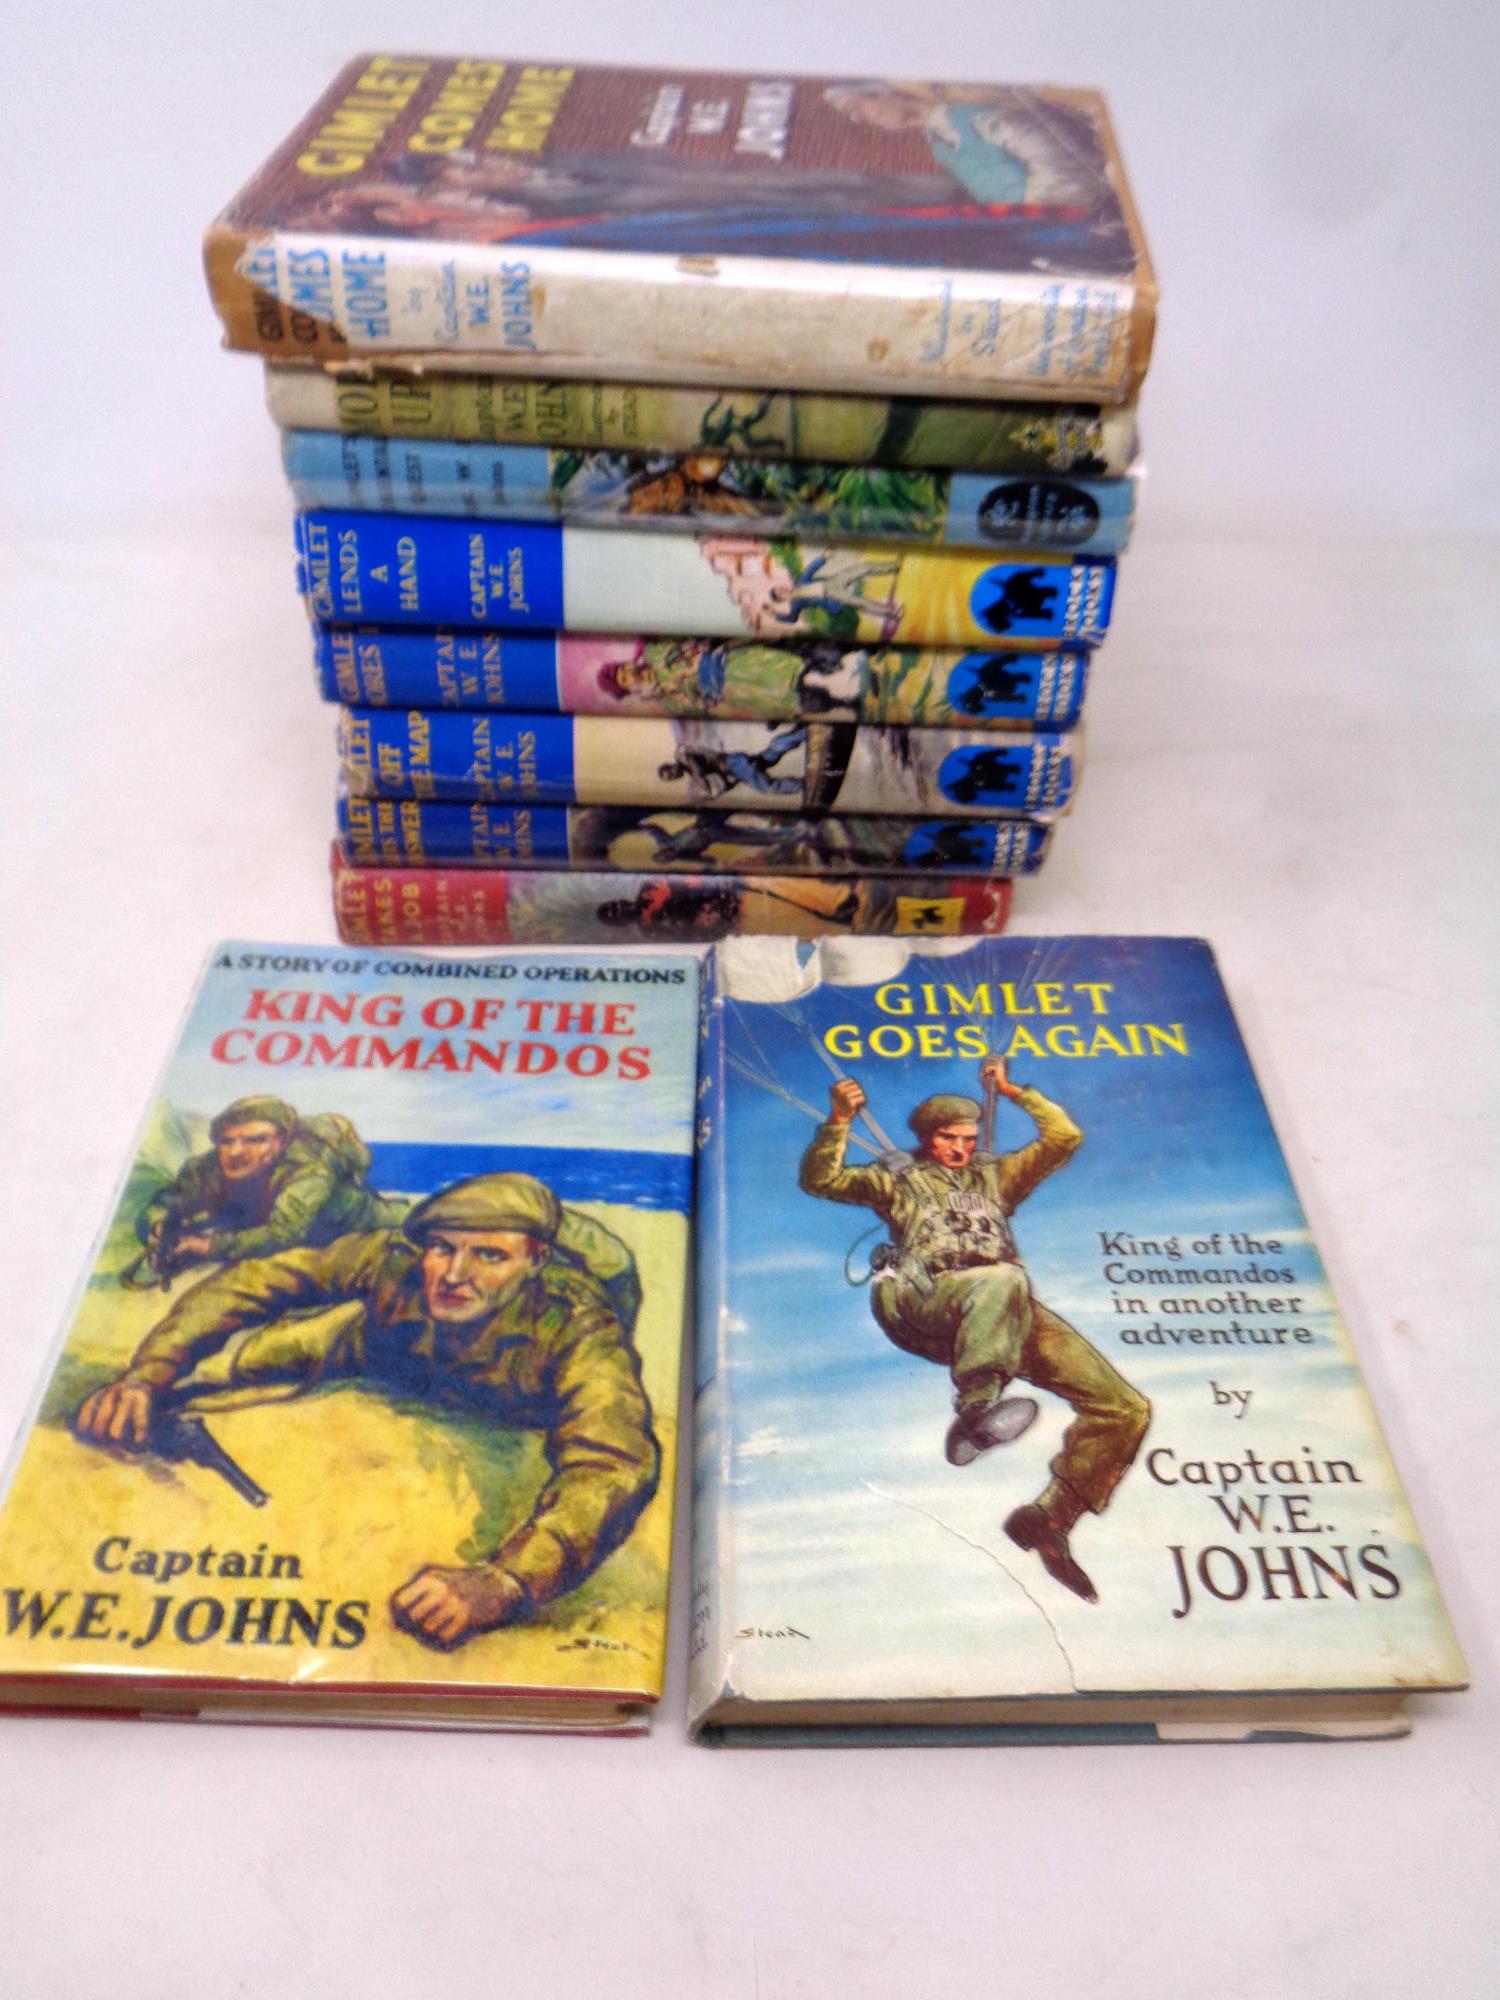 A complete set of 11 W E Johns Gimlet books with dust jackets